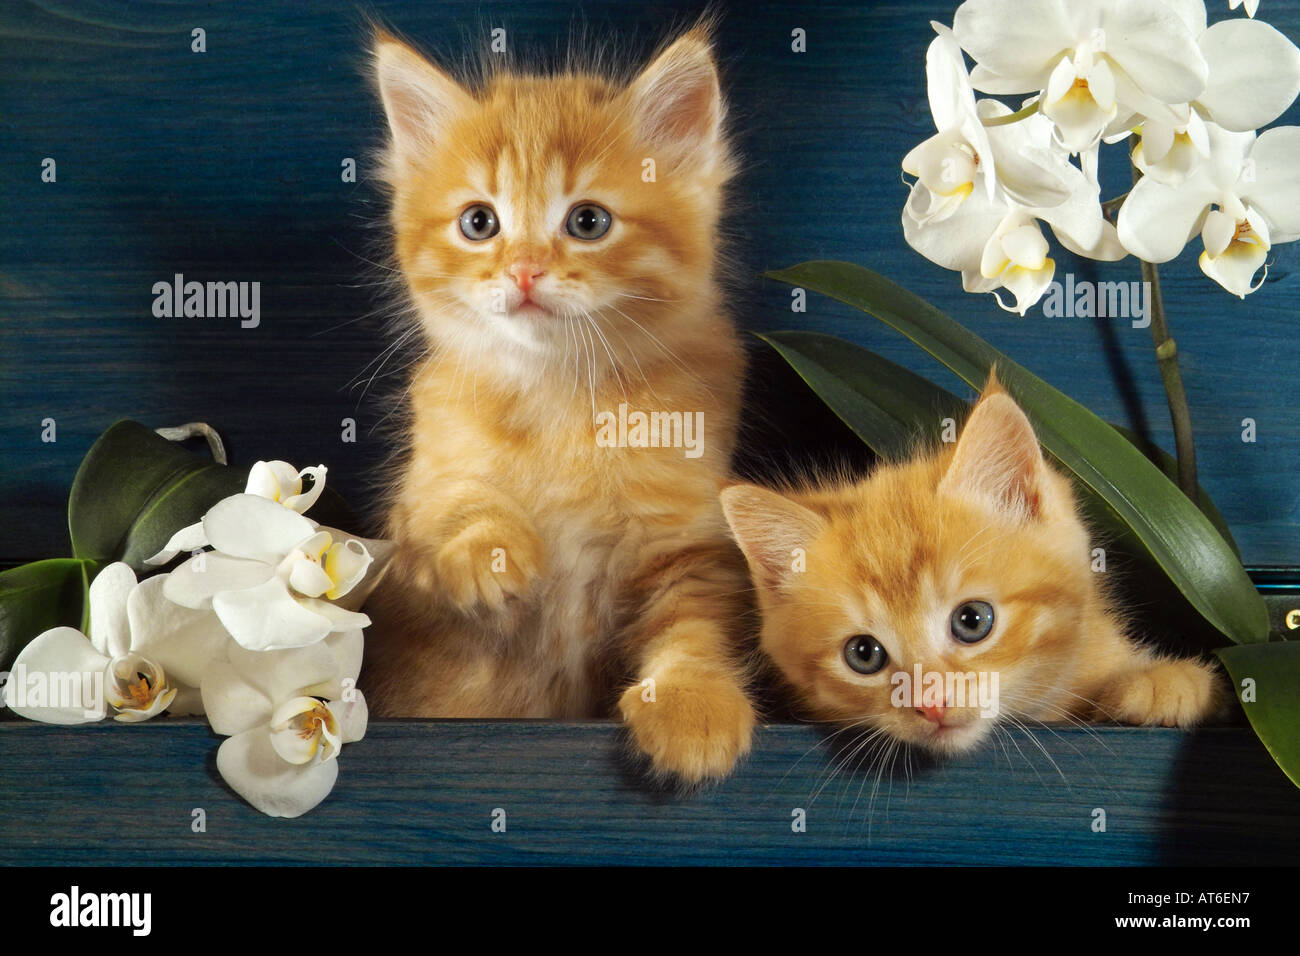 Domestic cat. Pair of red tabby kittens among flowering orchids Stock Photo